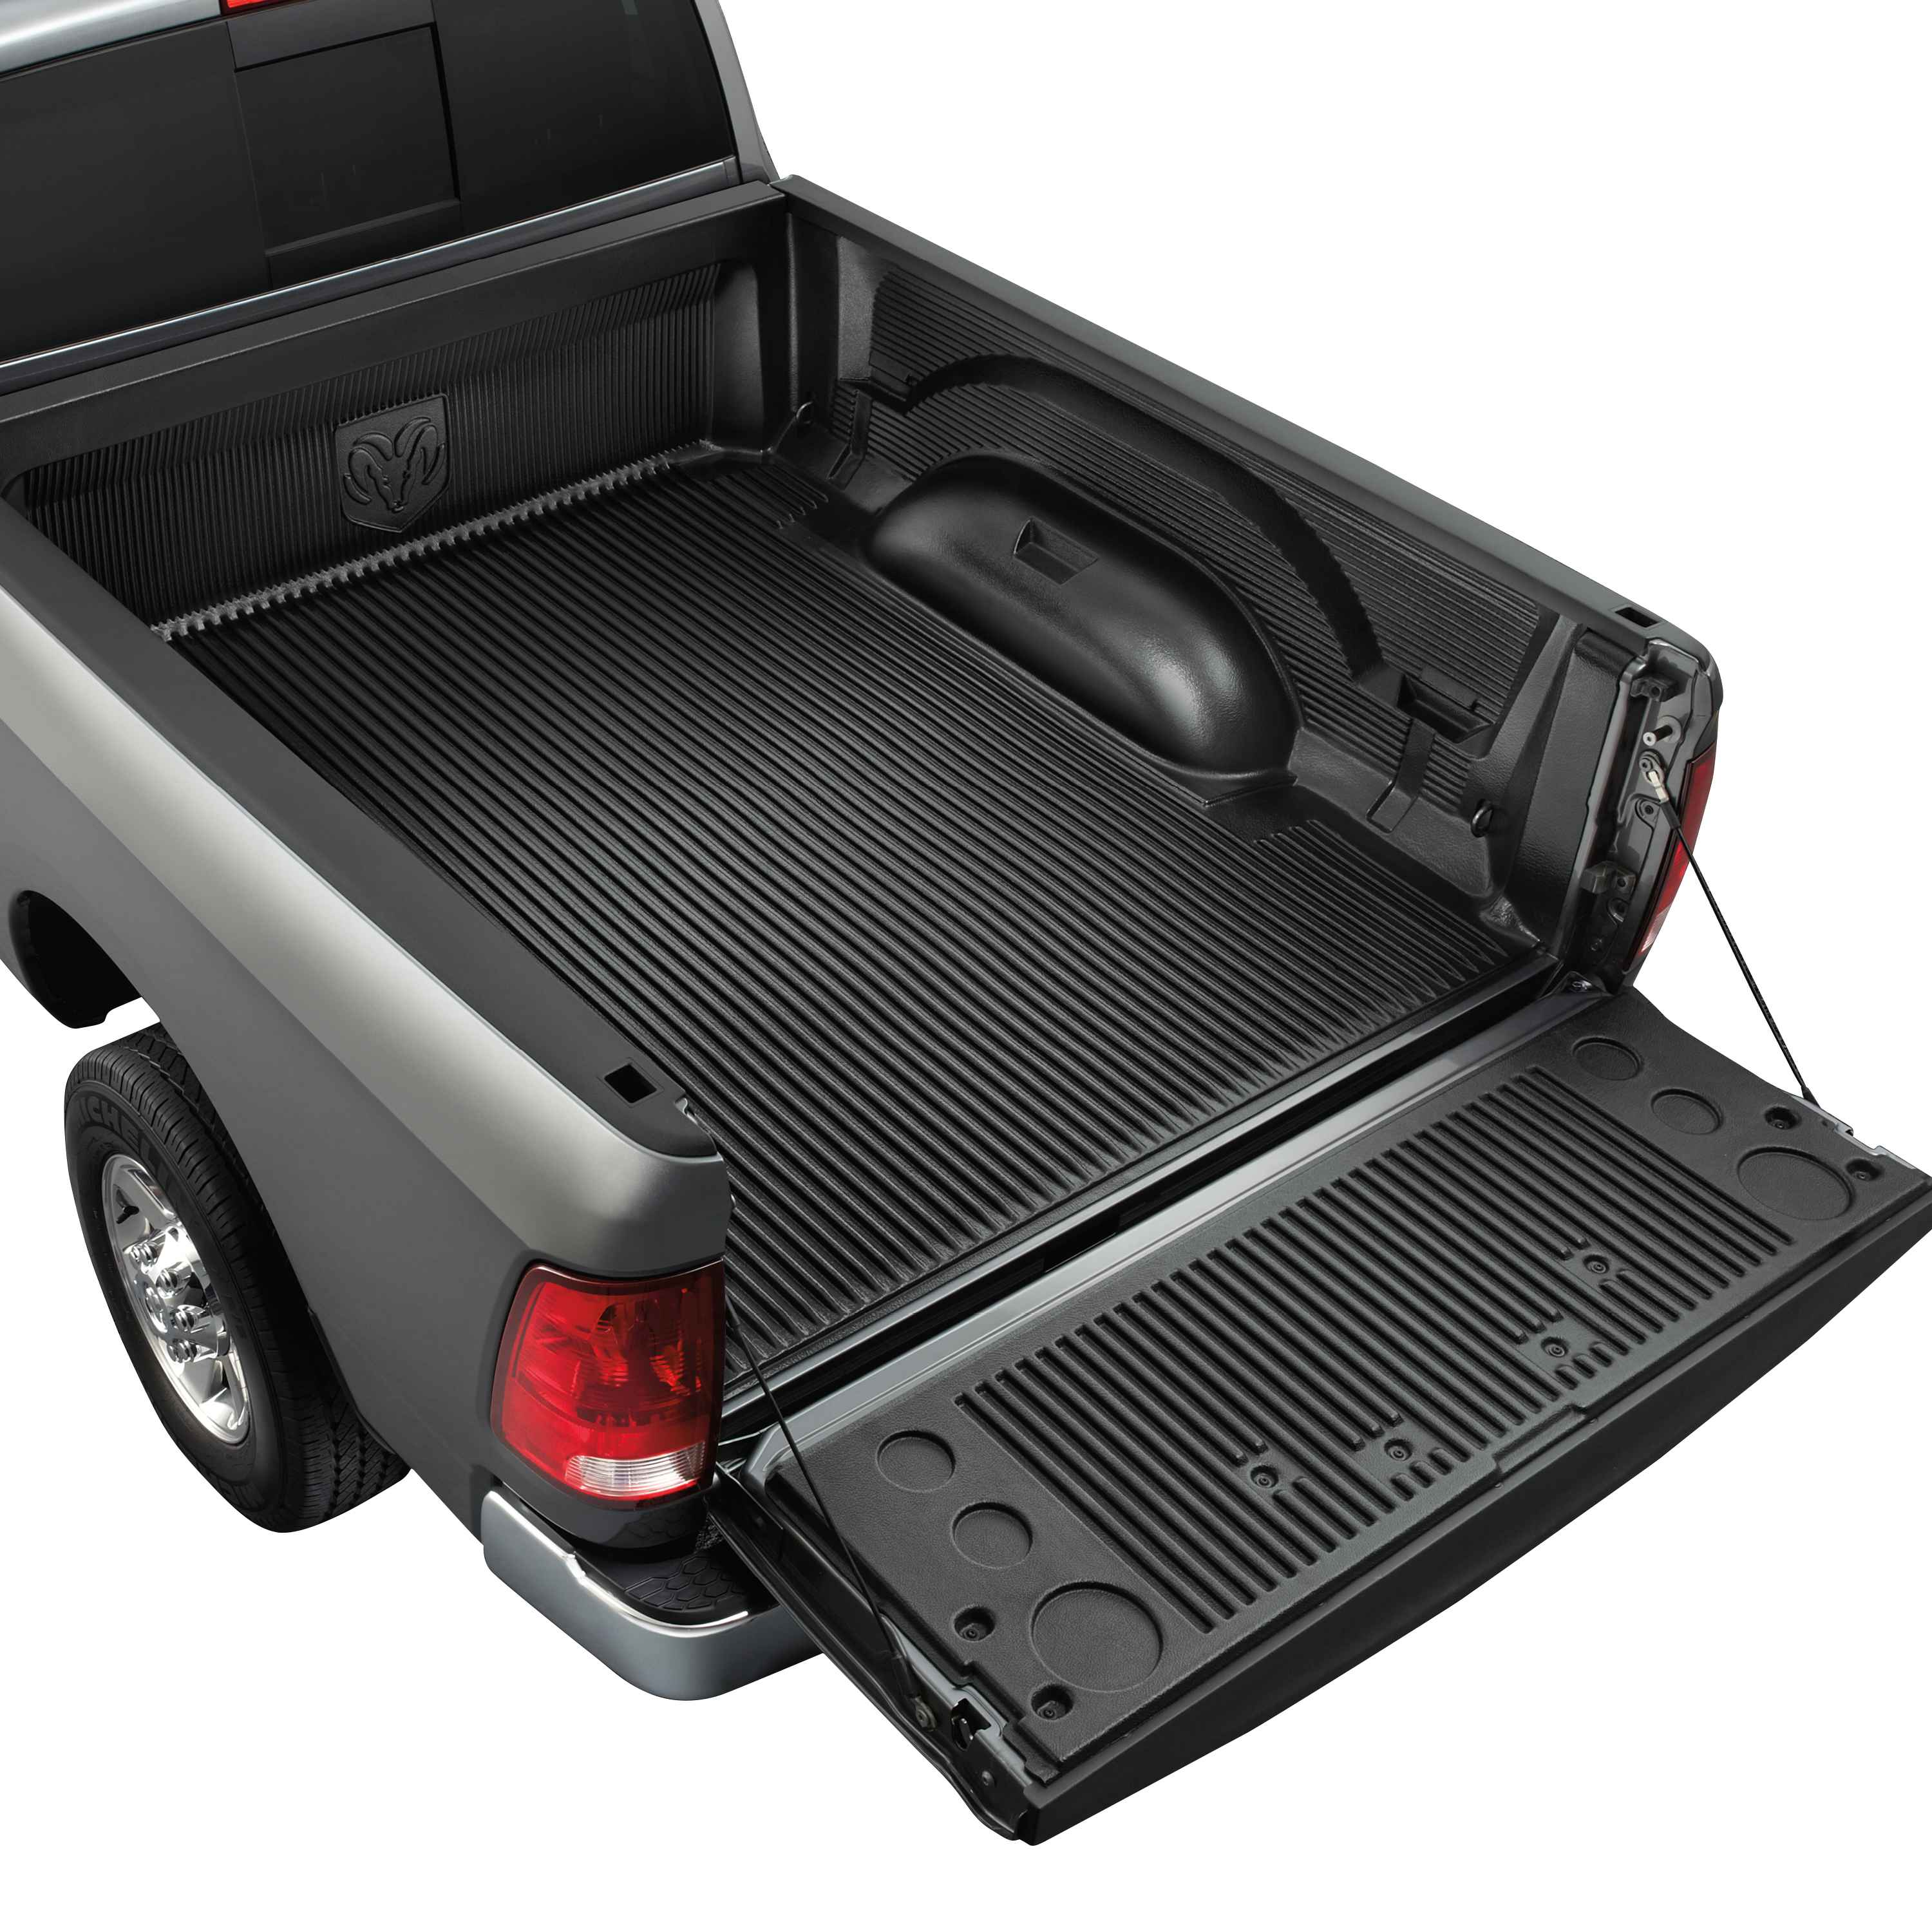 2017 RAM 2500 HD Drop-In Bedliner for 6.4 Conventional Bed 82214983AD